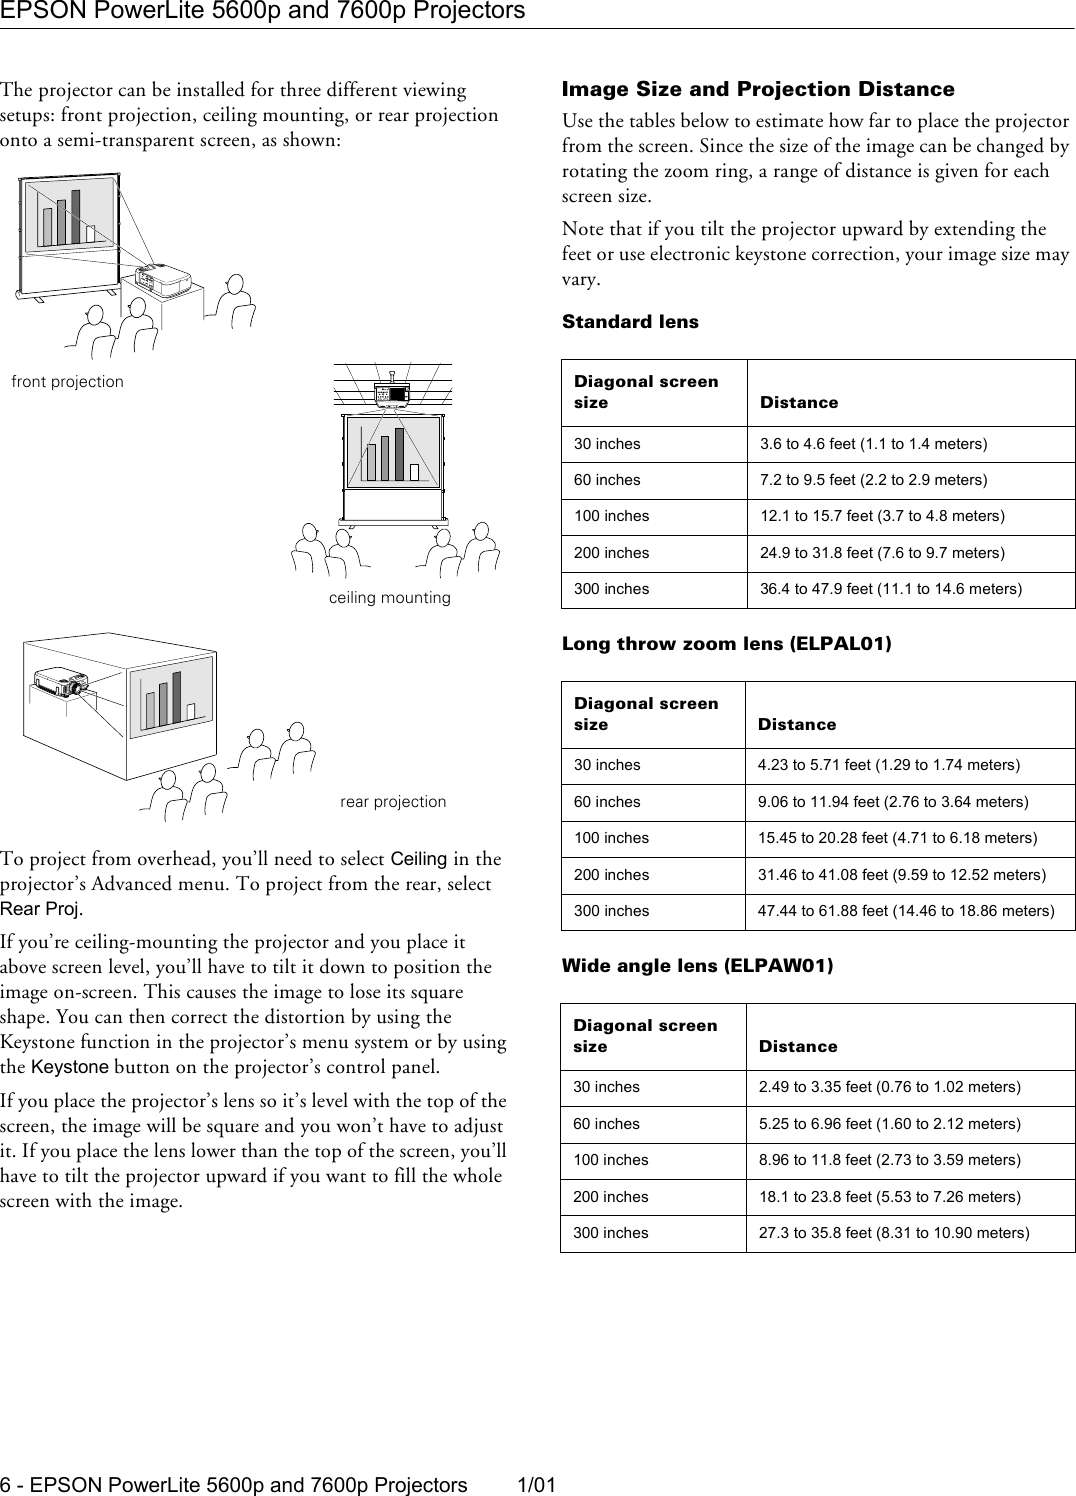 Page 4 of 11 - Epson Epson-Powerlite-5600P-Multimedia-Projector-Product-Information-Guide- PowerLite 5600p / 7600p - Product Information Guide  Epson-powerlite-5600p-multimedia-projector-product-information-guide